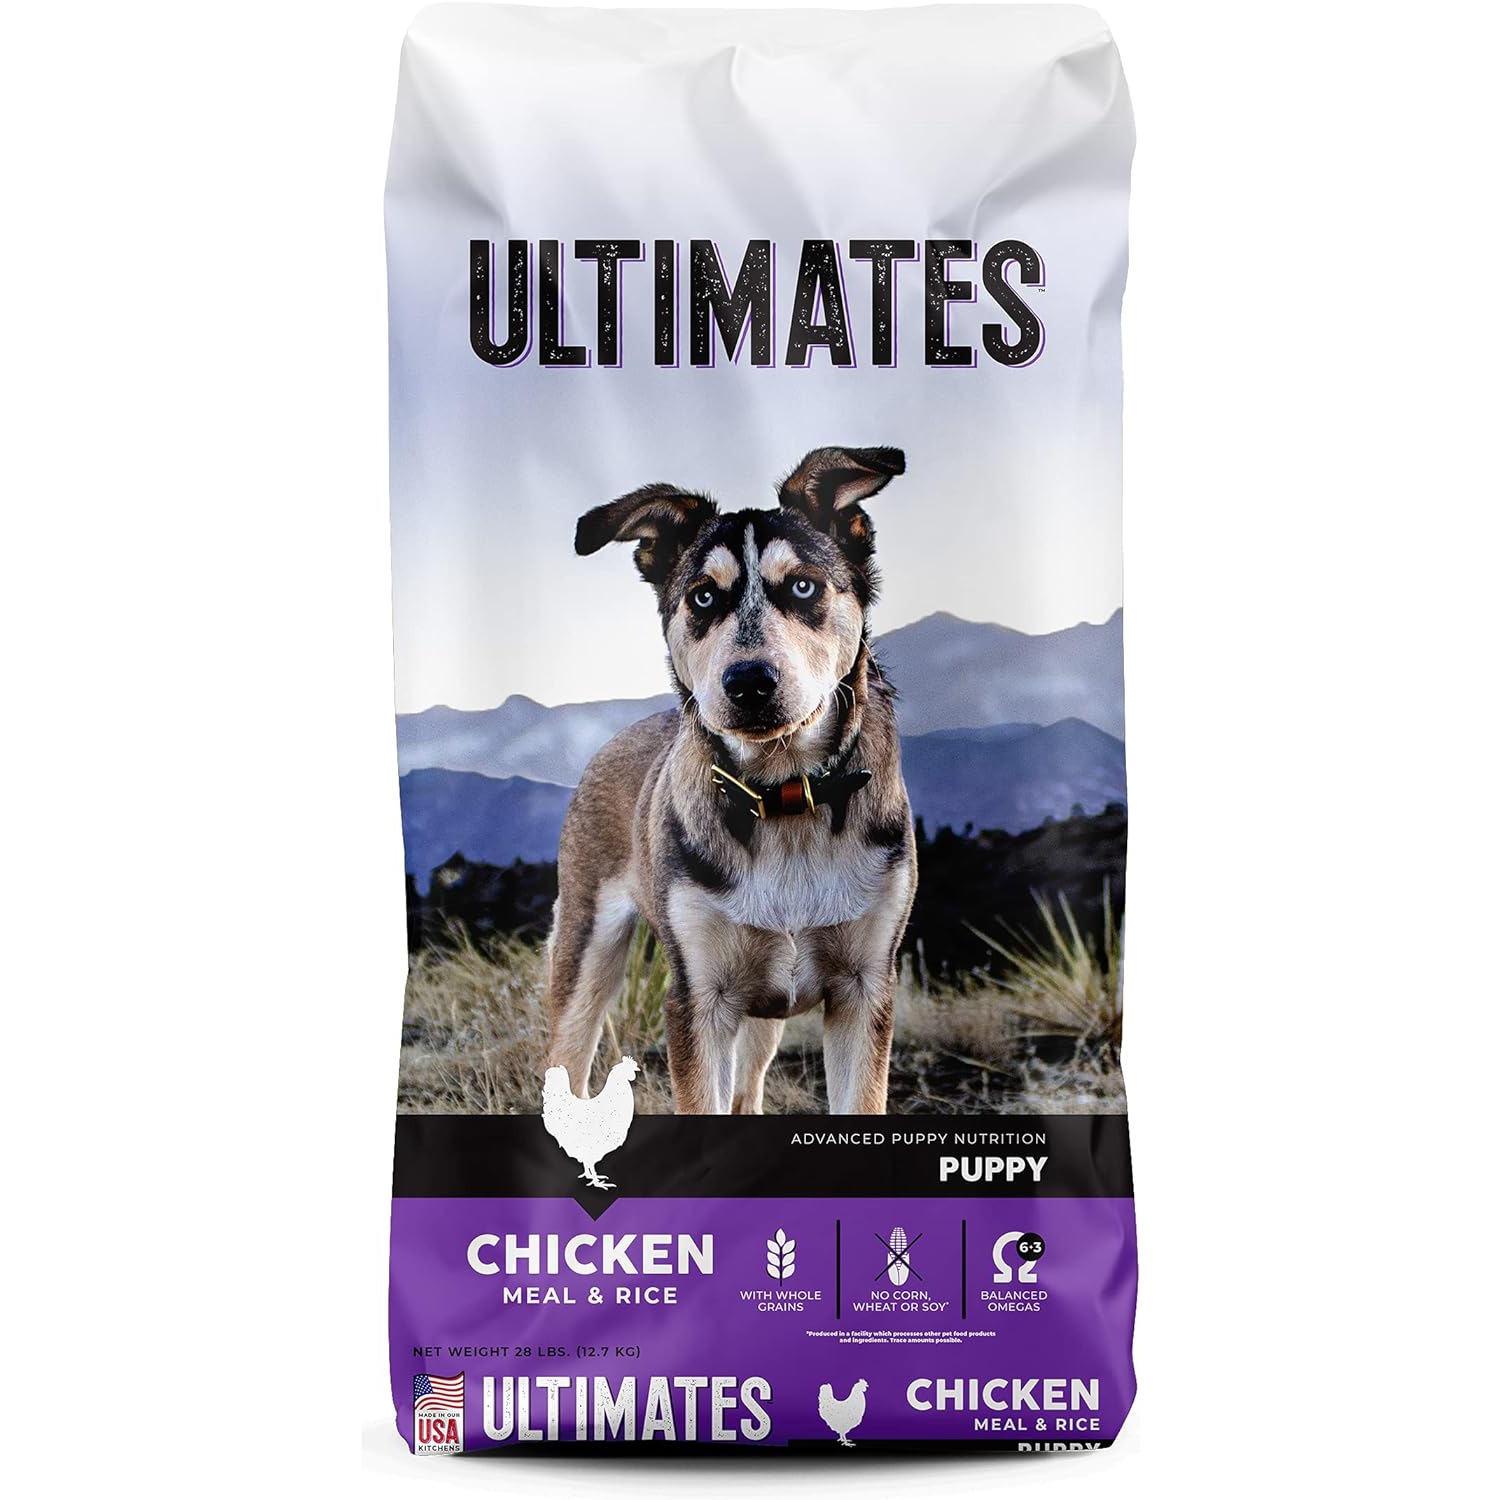 New Project Ultimates Puppy Chicken Meal & Rice Dry Dog Food 